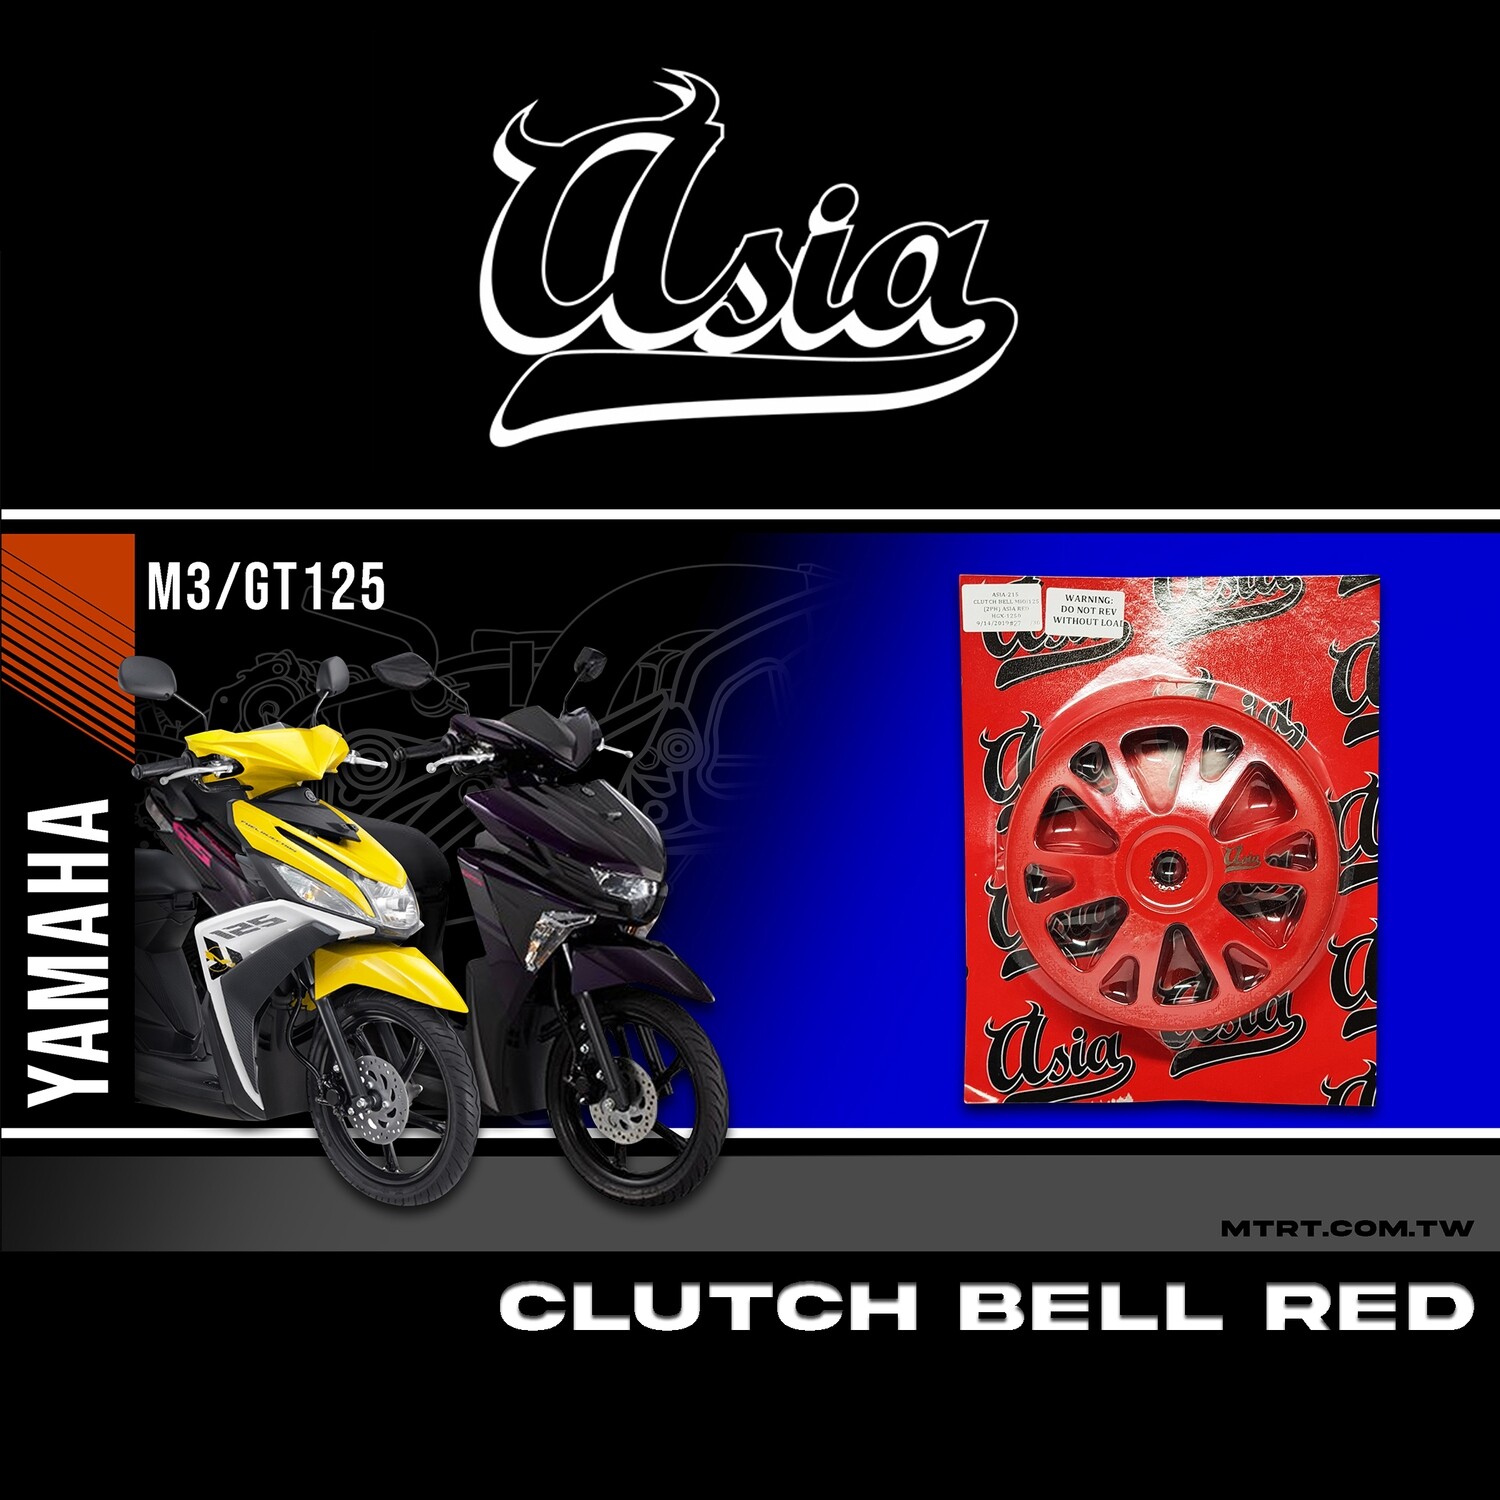 CLUTCH BELL MIOi125 (2PH) ASIA RED